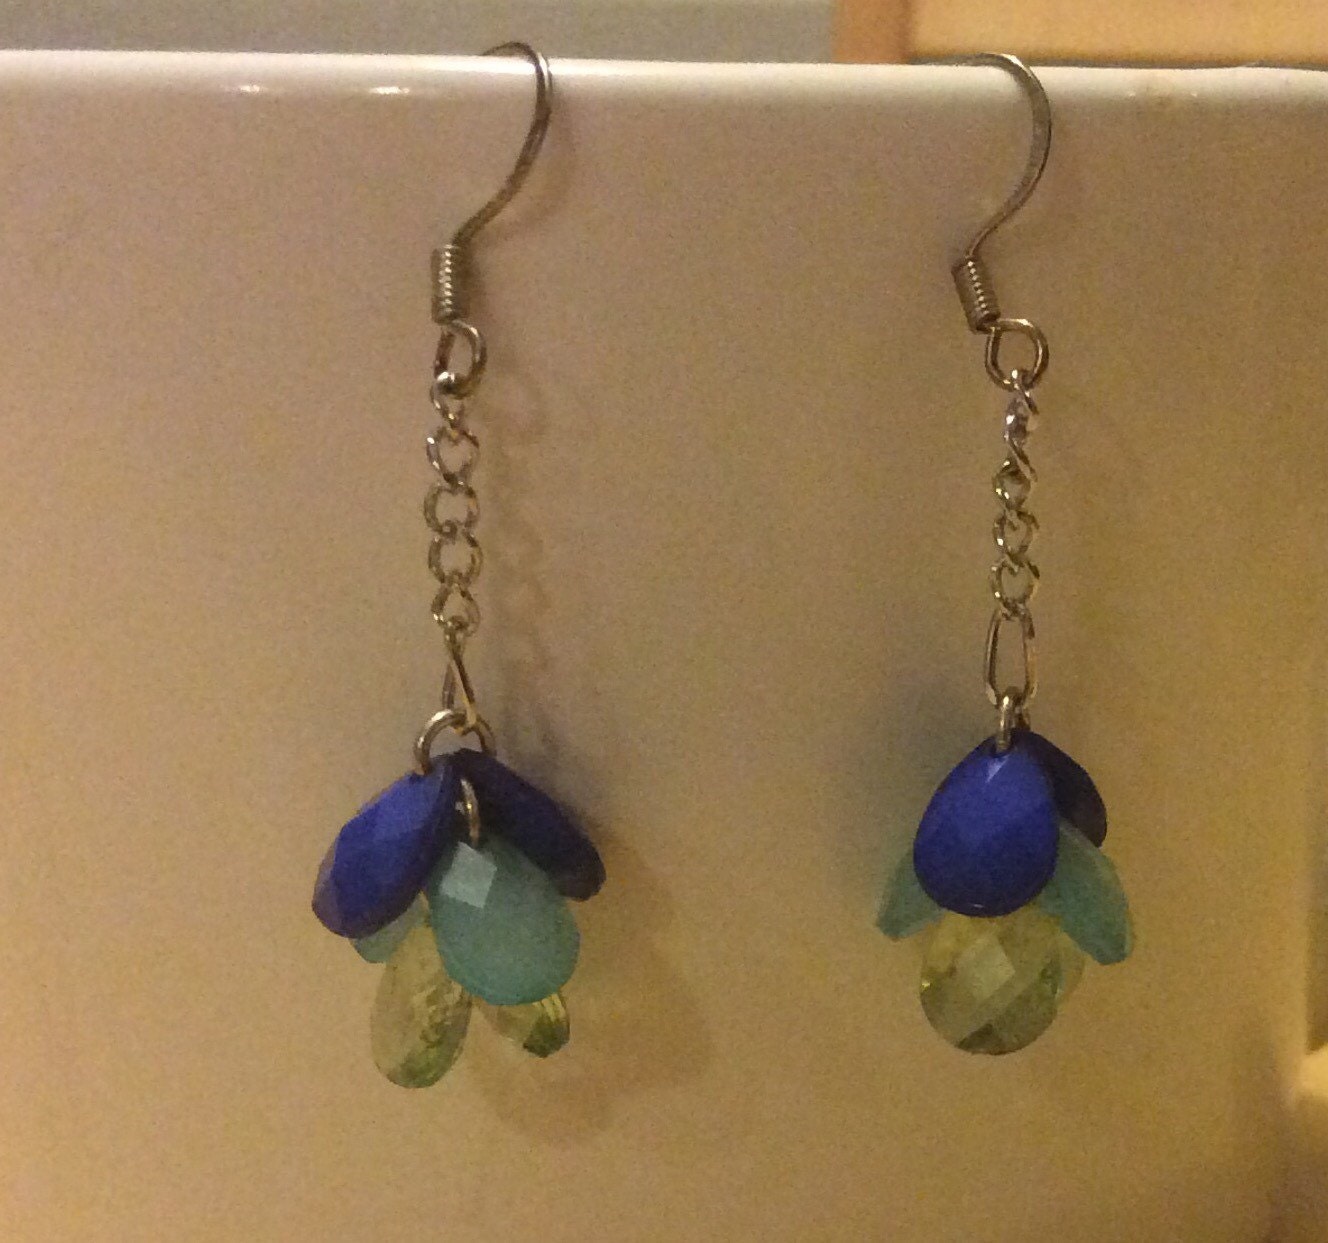 Blue and green earrings